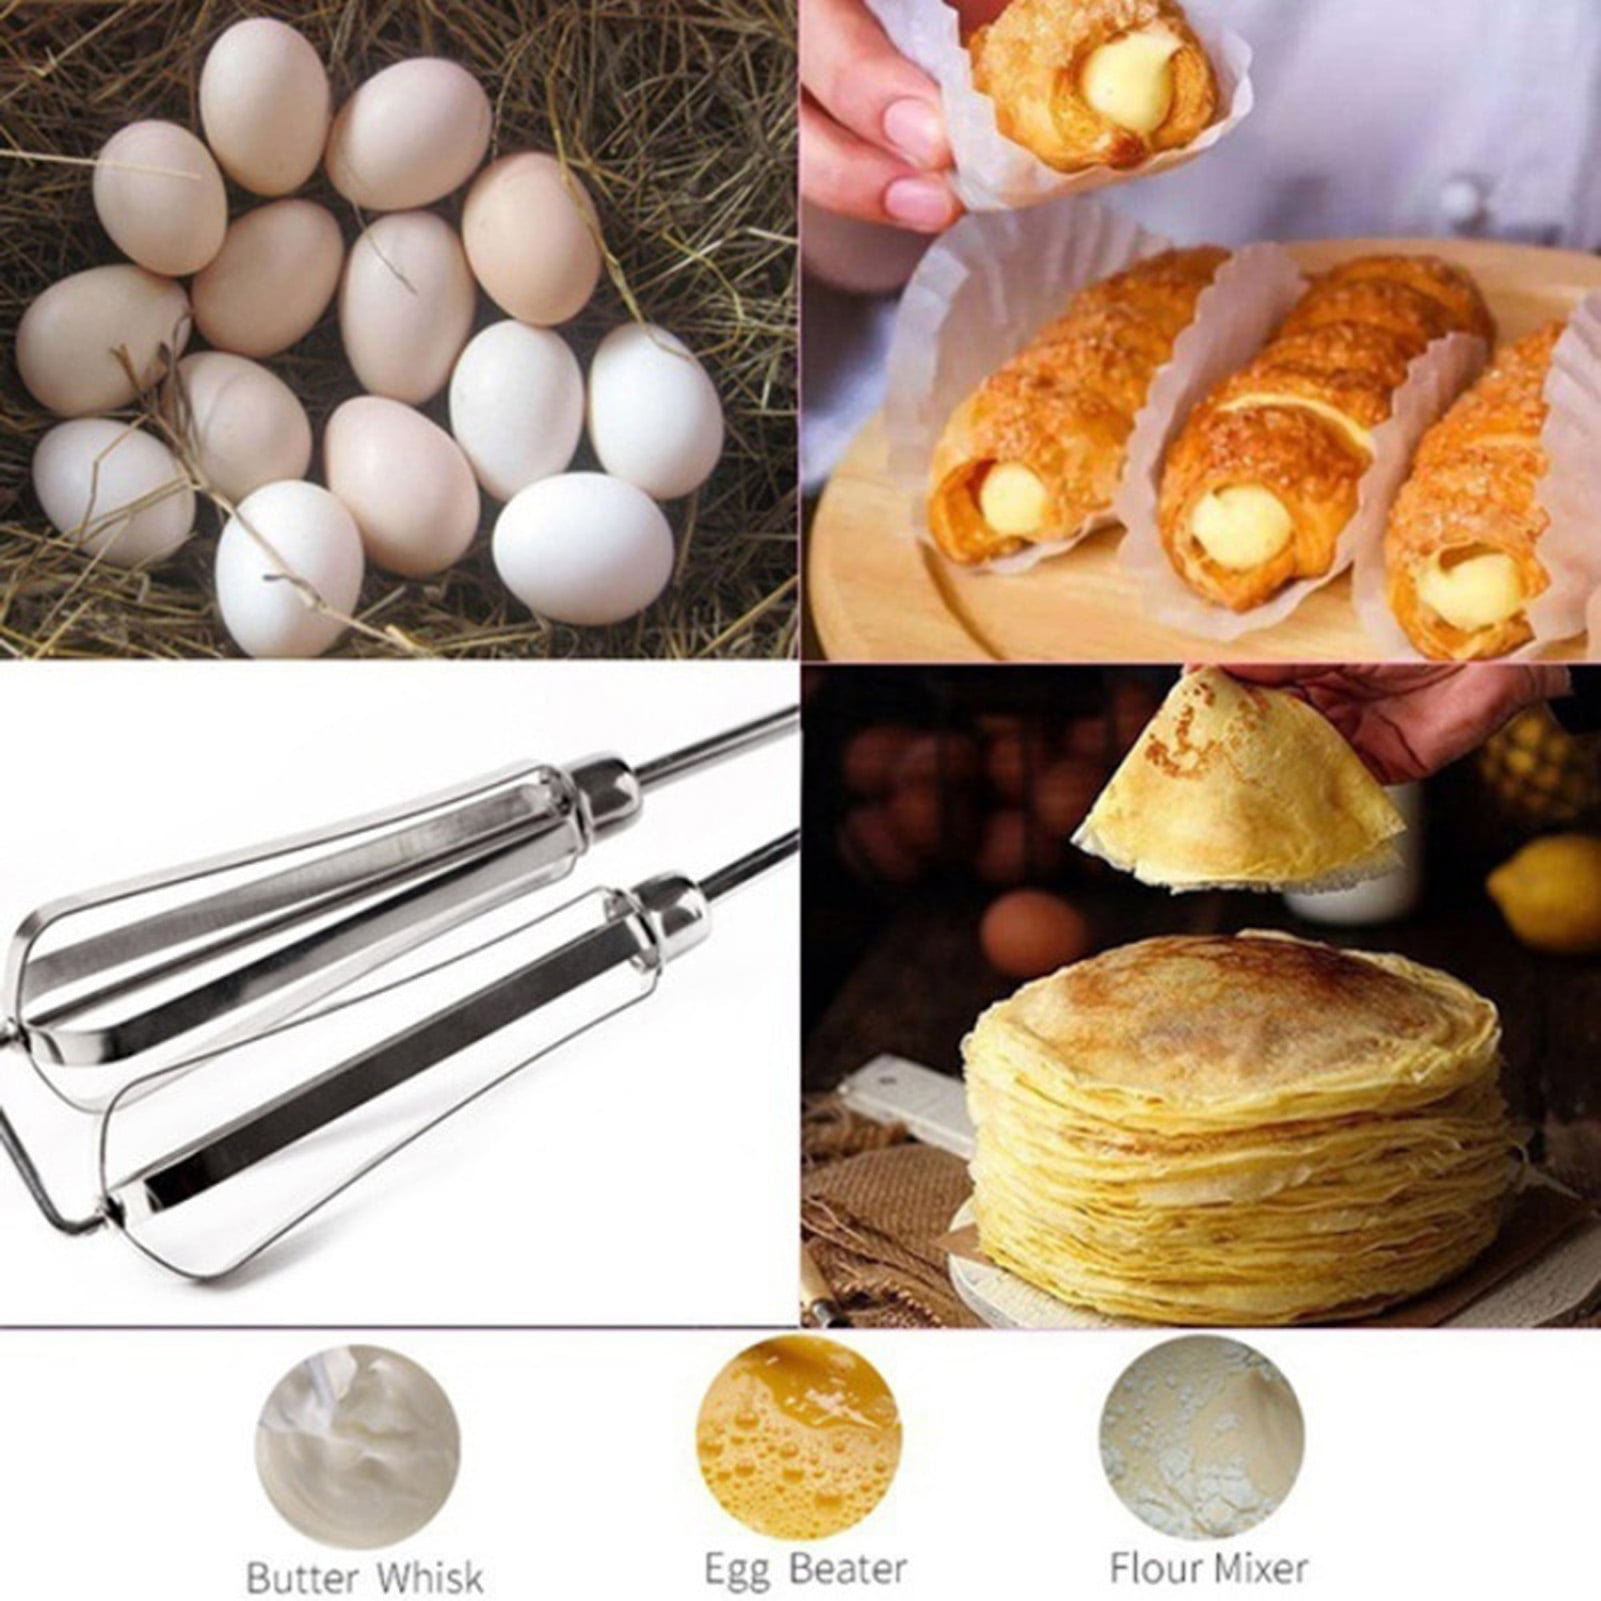 Stainless Steel Plastic Hand Crank Manual Egg Beater with Auto Rotation,  Efficiently Mix Butter, Eggs, and Flour, Perfect Home Kitchen Cooking